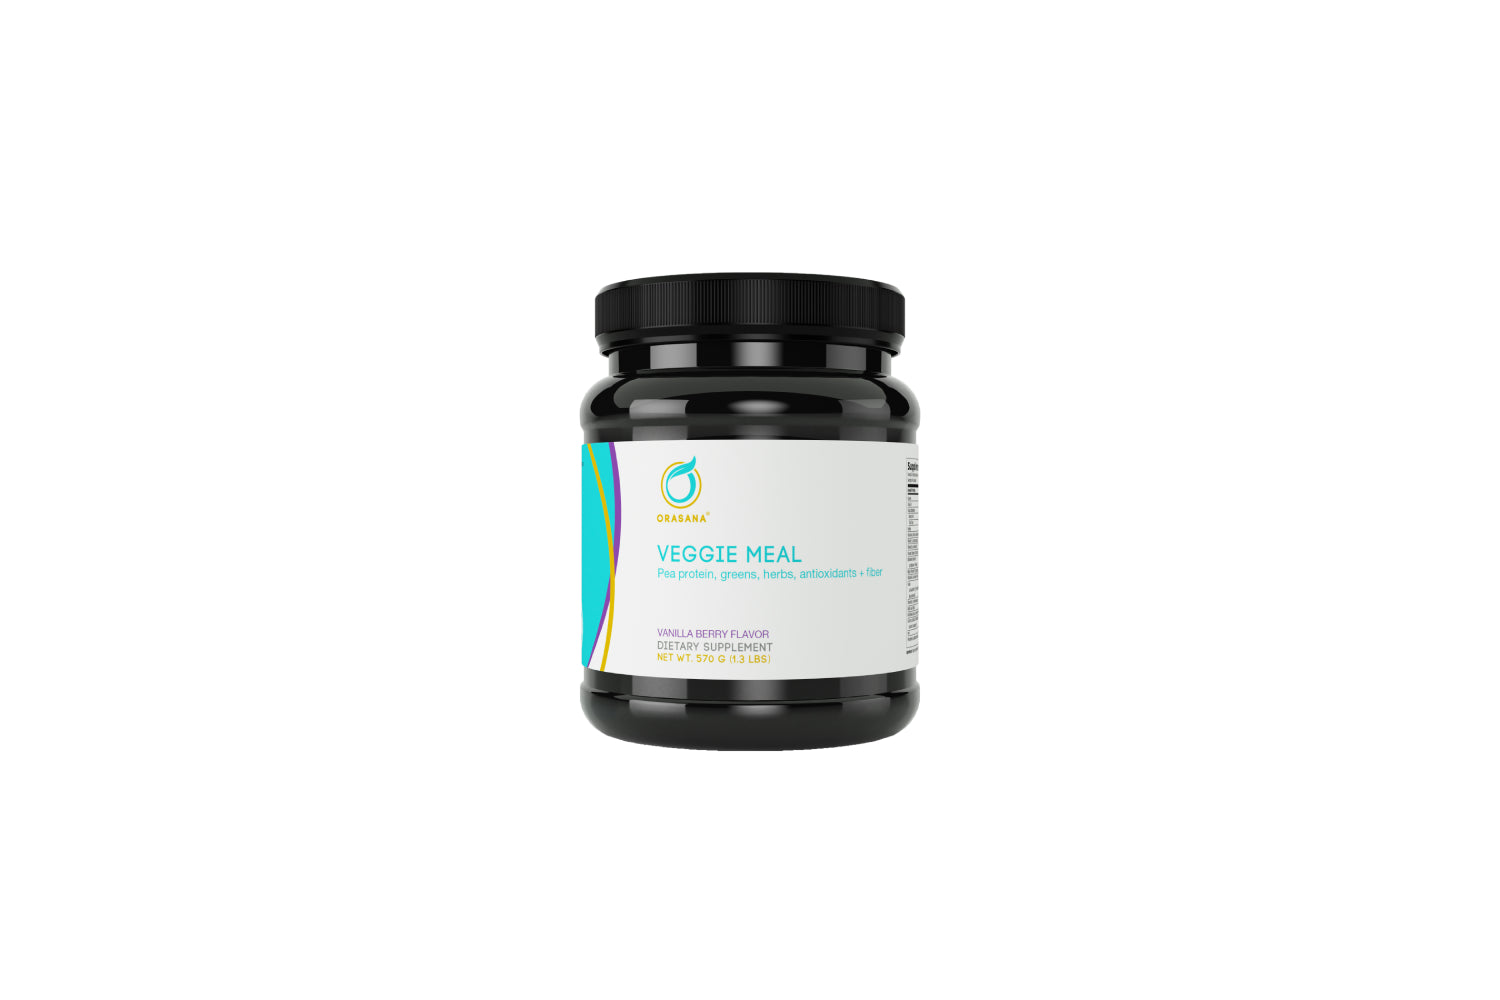 2023 Veggie meal is a dairy-free, plant-derived powder especially designed to include all nutrients necessary in a full meal, featuring pea protein isolate as its protein source